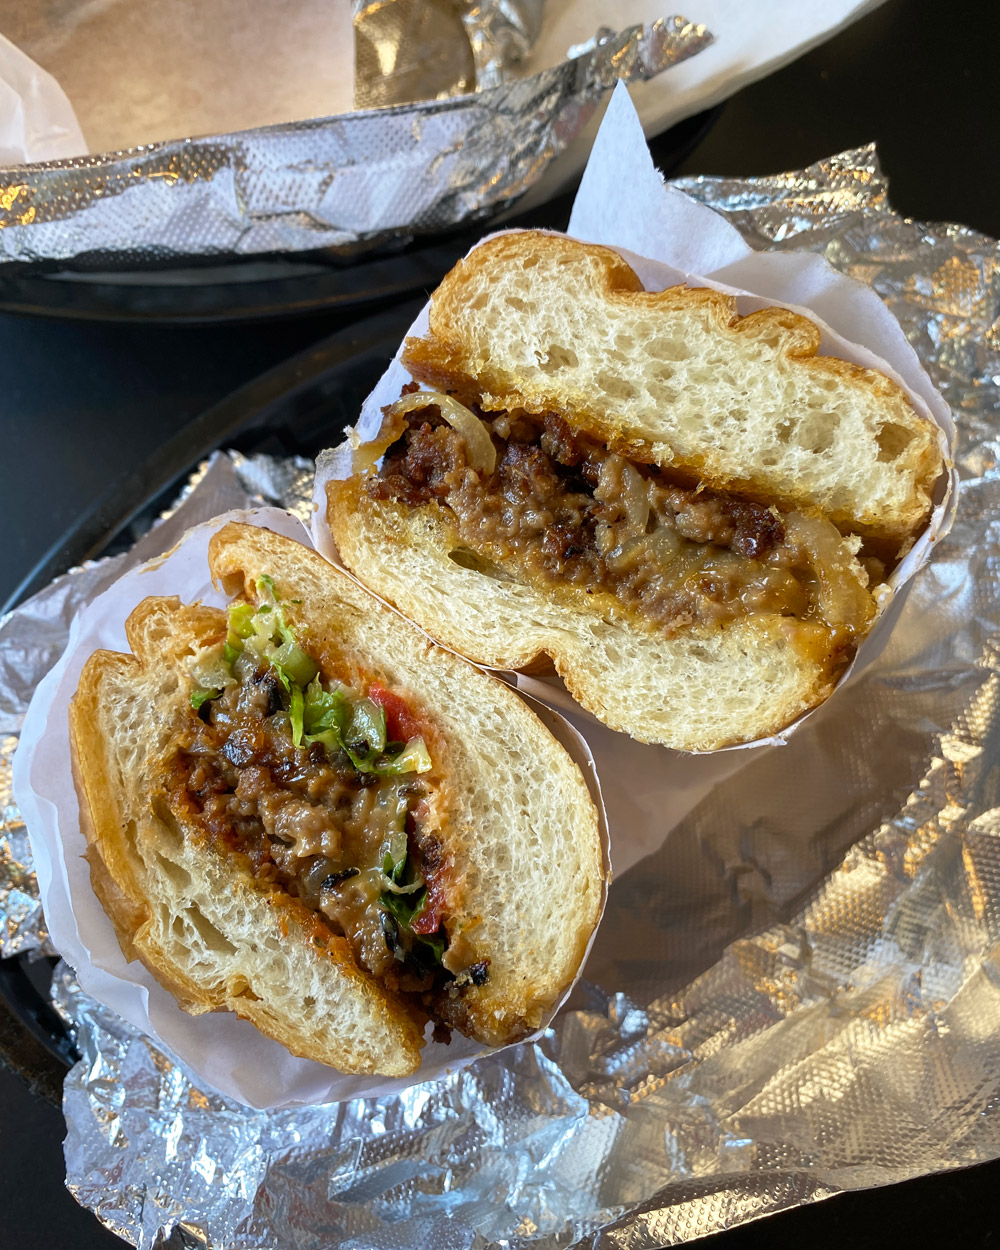 Extra Market Chopped Cheese and Philly Cheesesteak